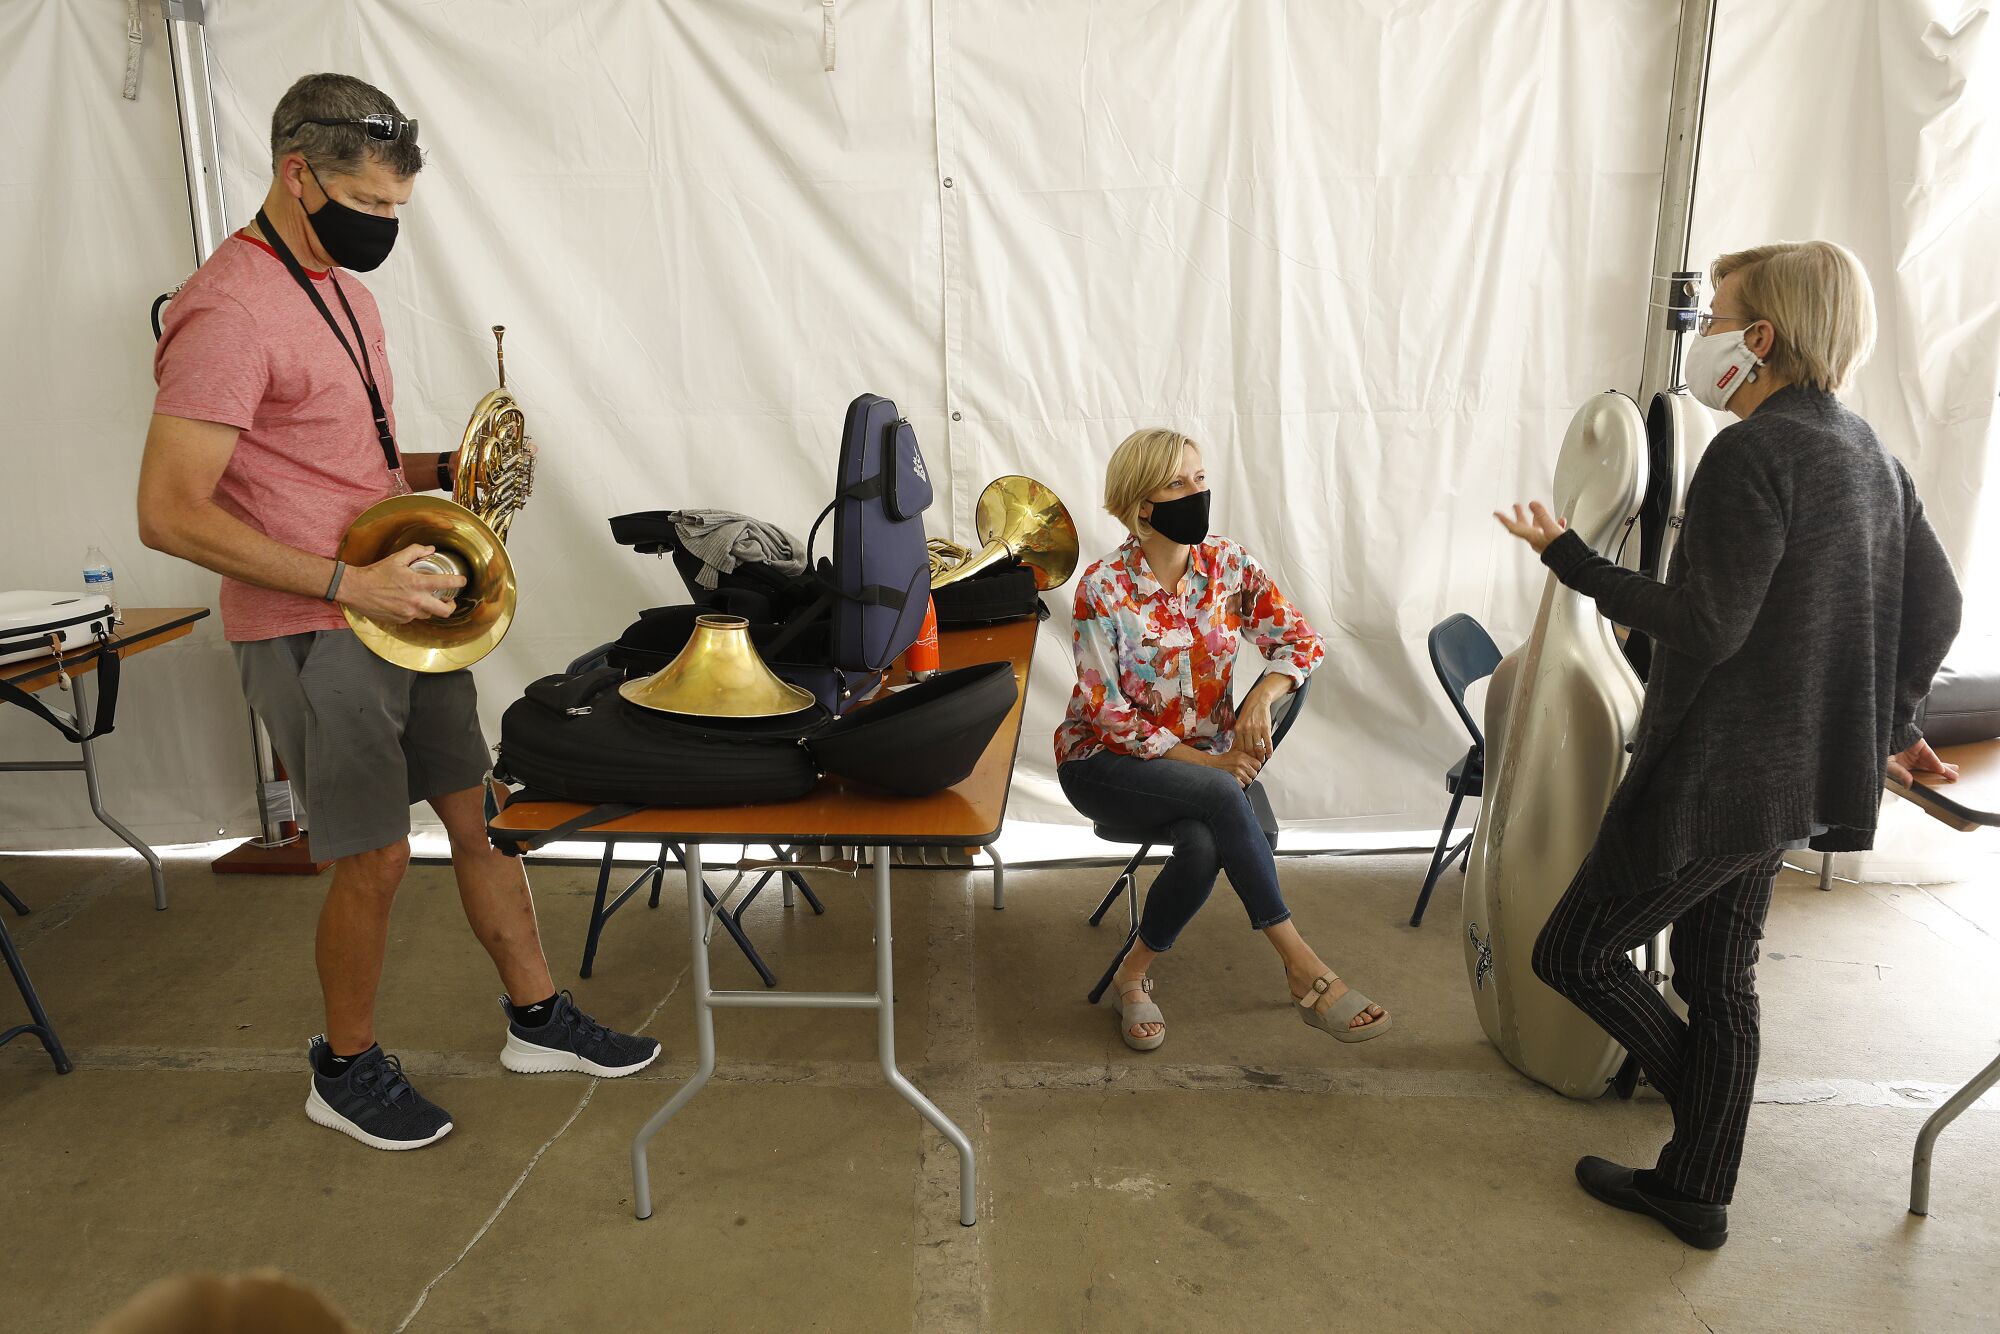 Musicians in masks converse among their instruments